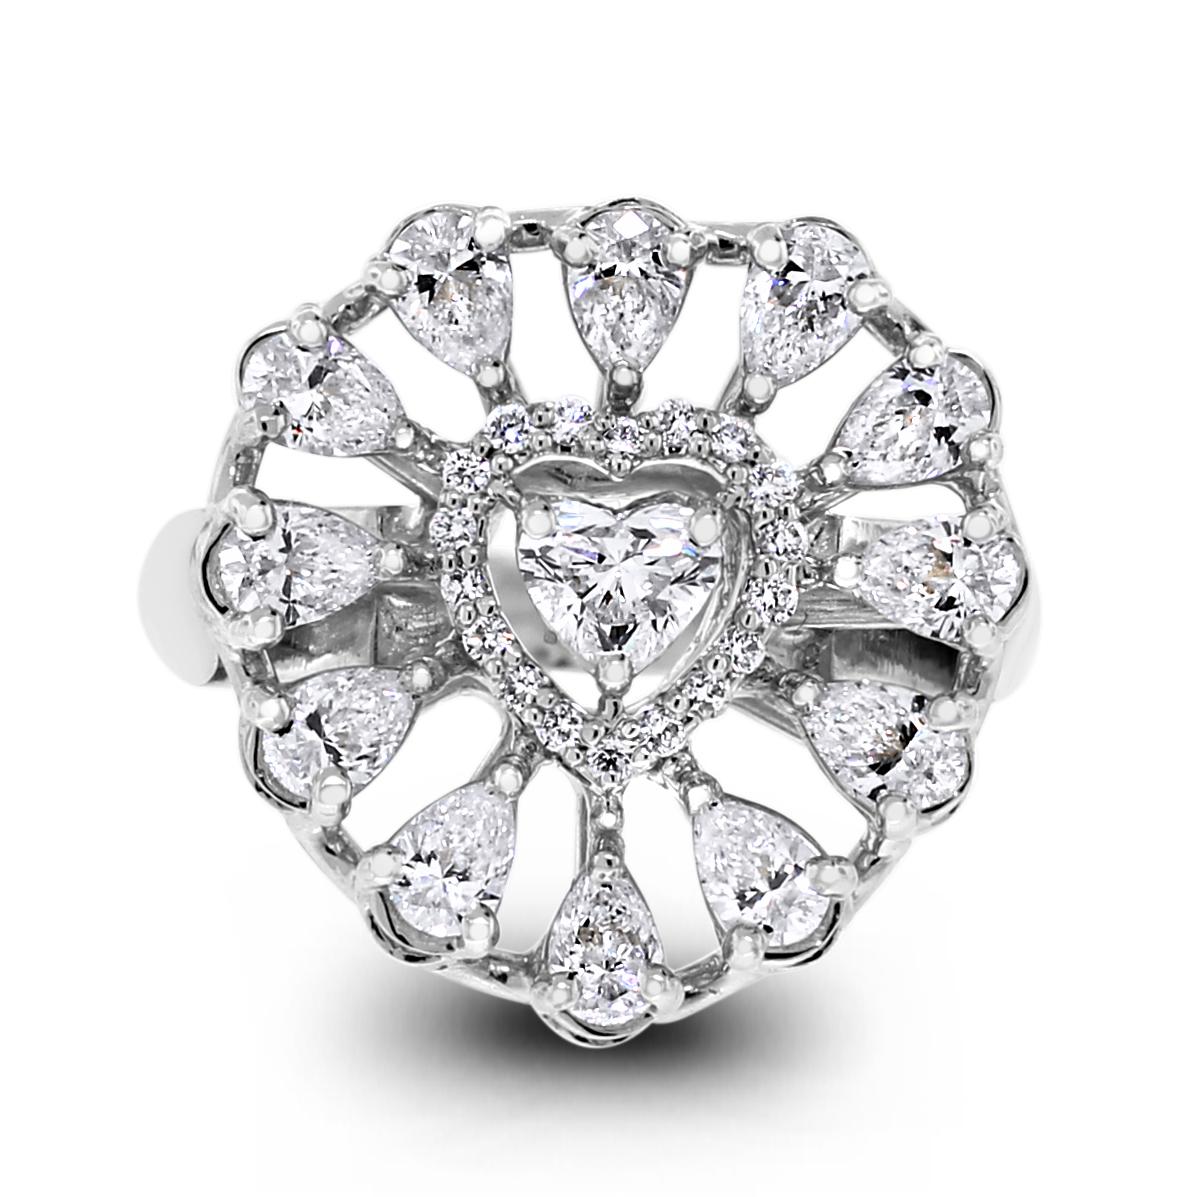 The Heart diamond ring is an accentuated halo ring designed to feel glamorous and stylish. It is one that can be sported on any occasion to make to style statement. 

Center Diamond Shape: Heart 
Center Diamond Weight: 0.19 ct 
Diamond Color: G - H